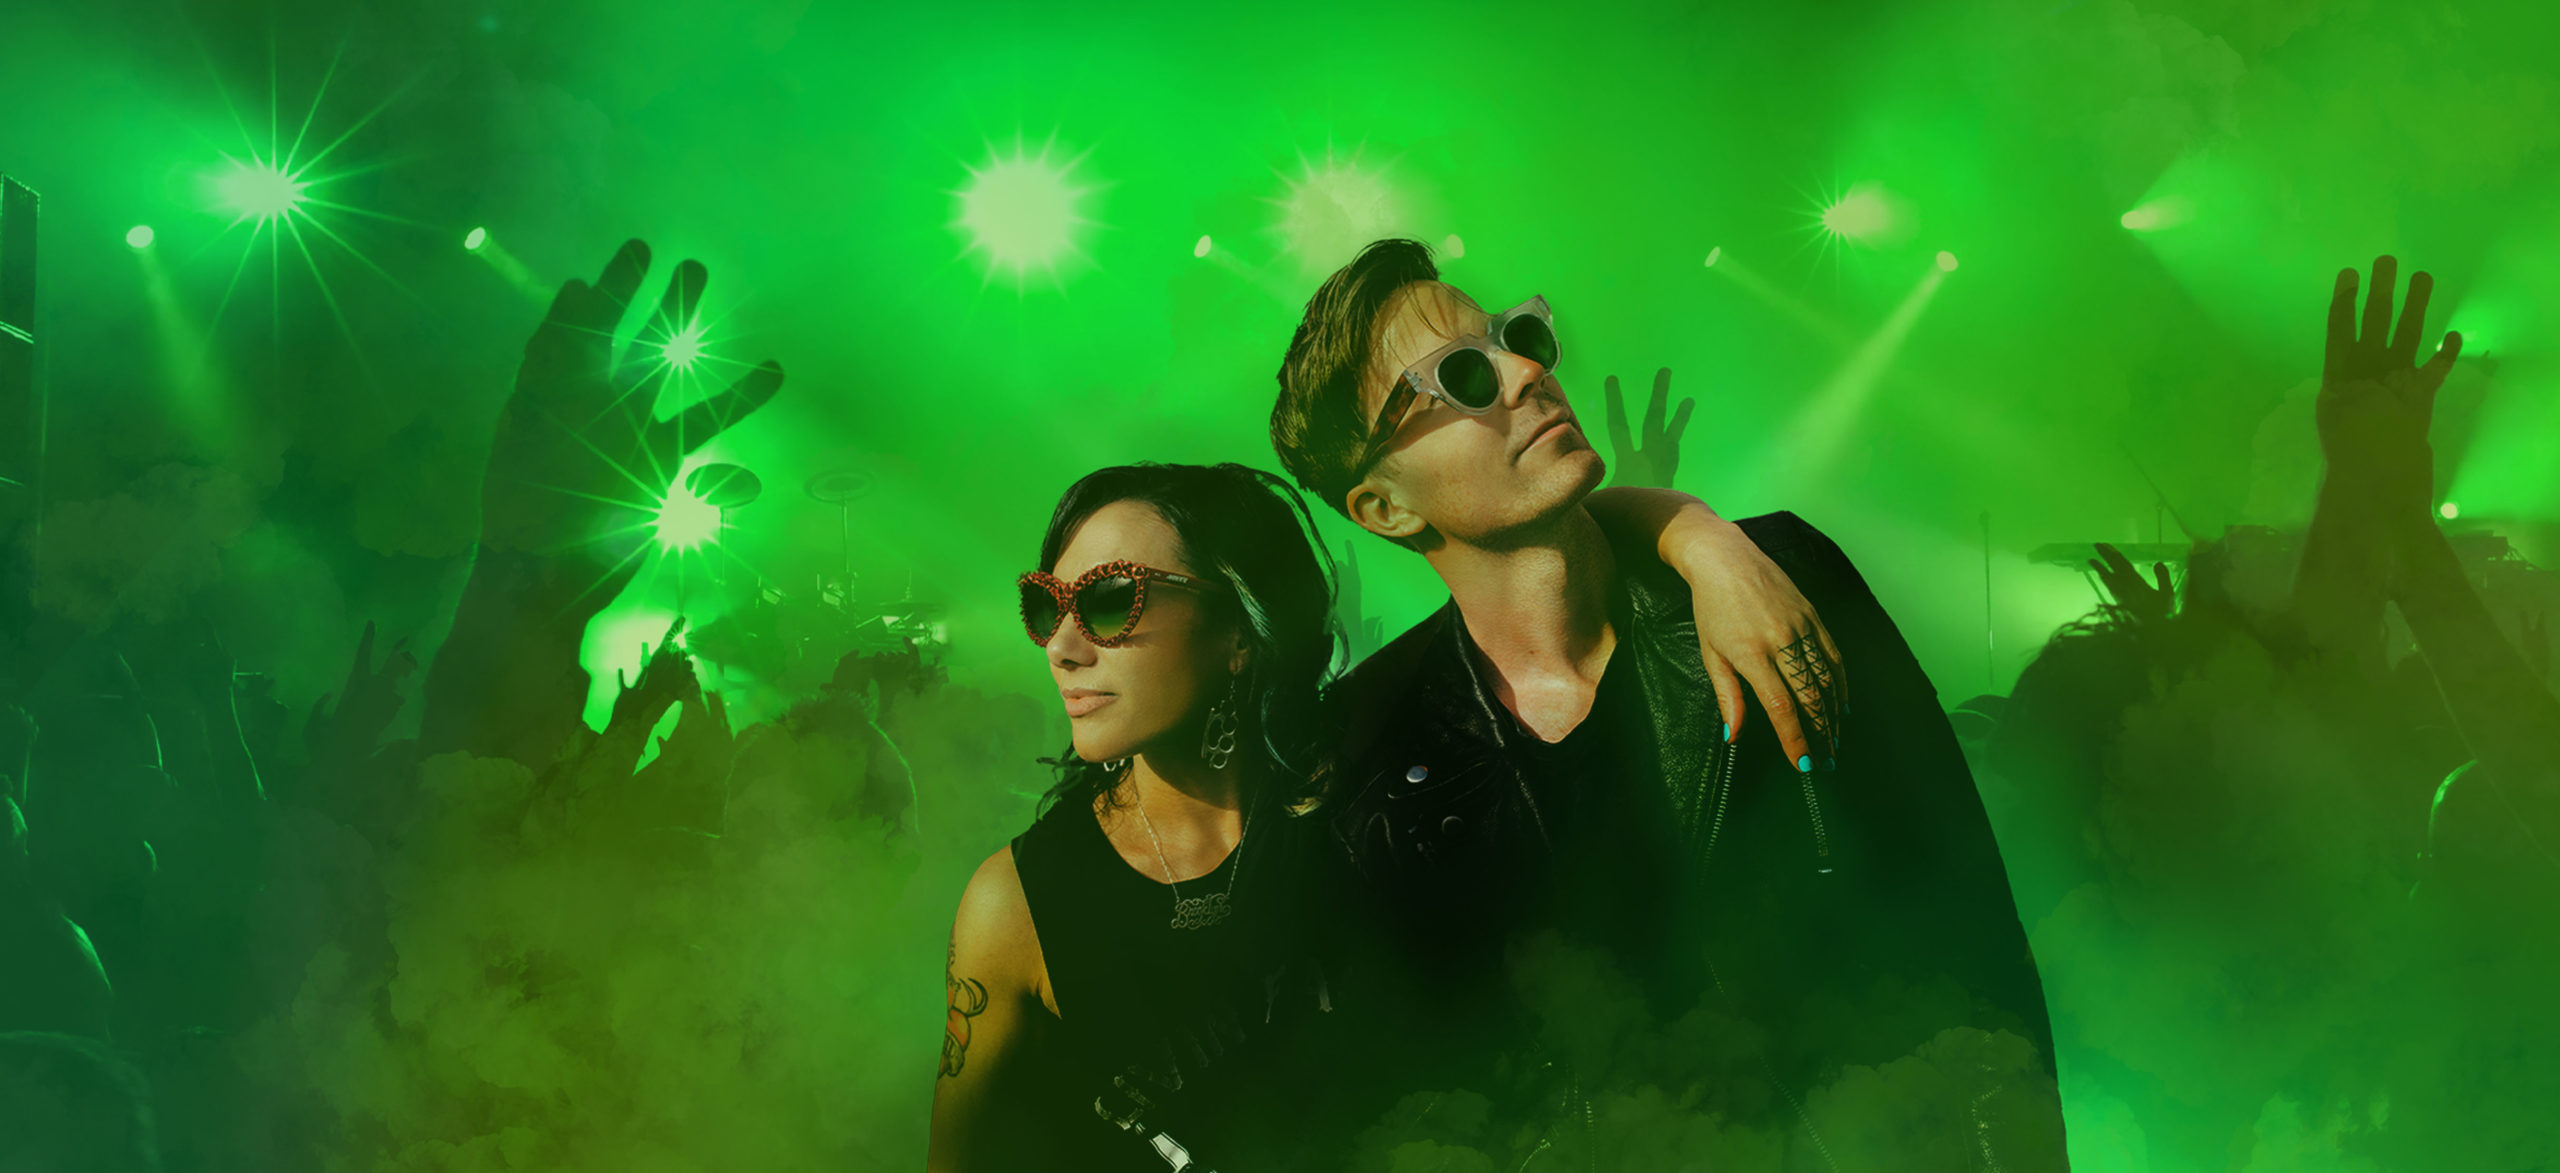 Background image for ST. PATRICK'S DAY BLOCK PARTY FEAT. MATT AND KIM